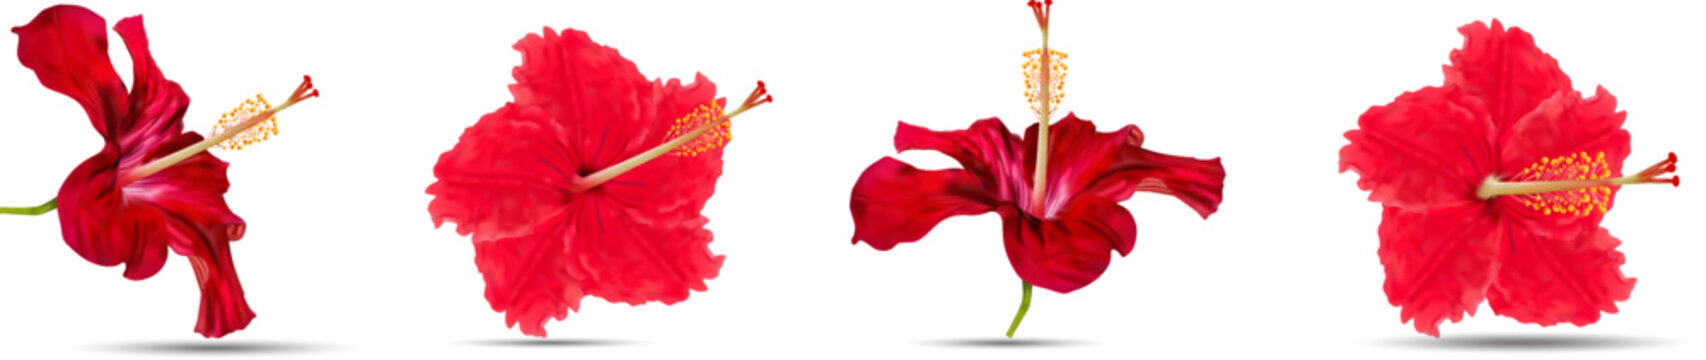 Hibiscus, png, Tropical flower. Exotic plant. Red. Vector. Isolated. Red hibiscus isolated on a white background, Red Hibiscus. High detailing flowers. Hibiscus vector png, image, kali puja, puja,